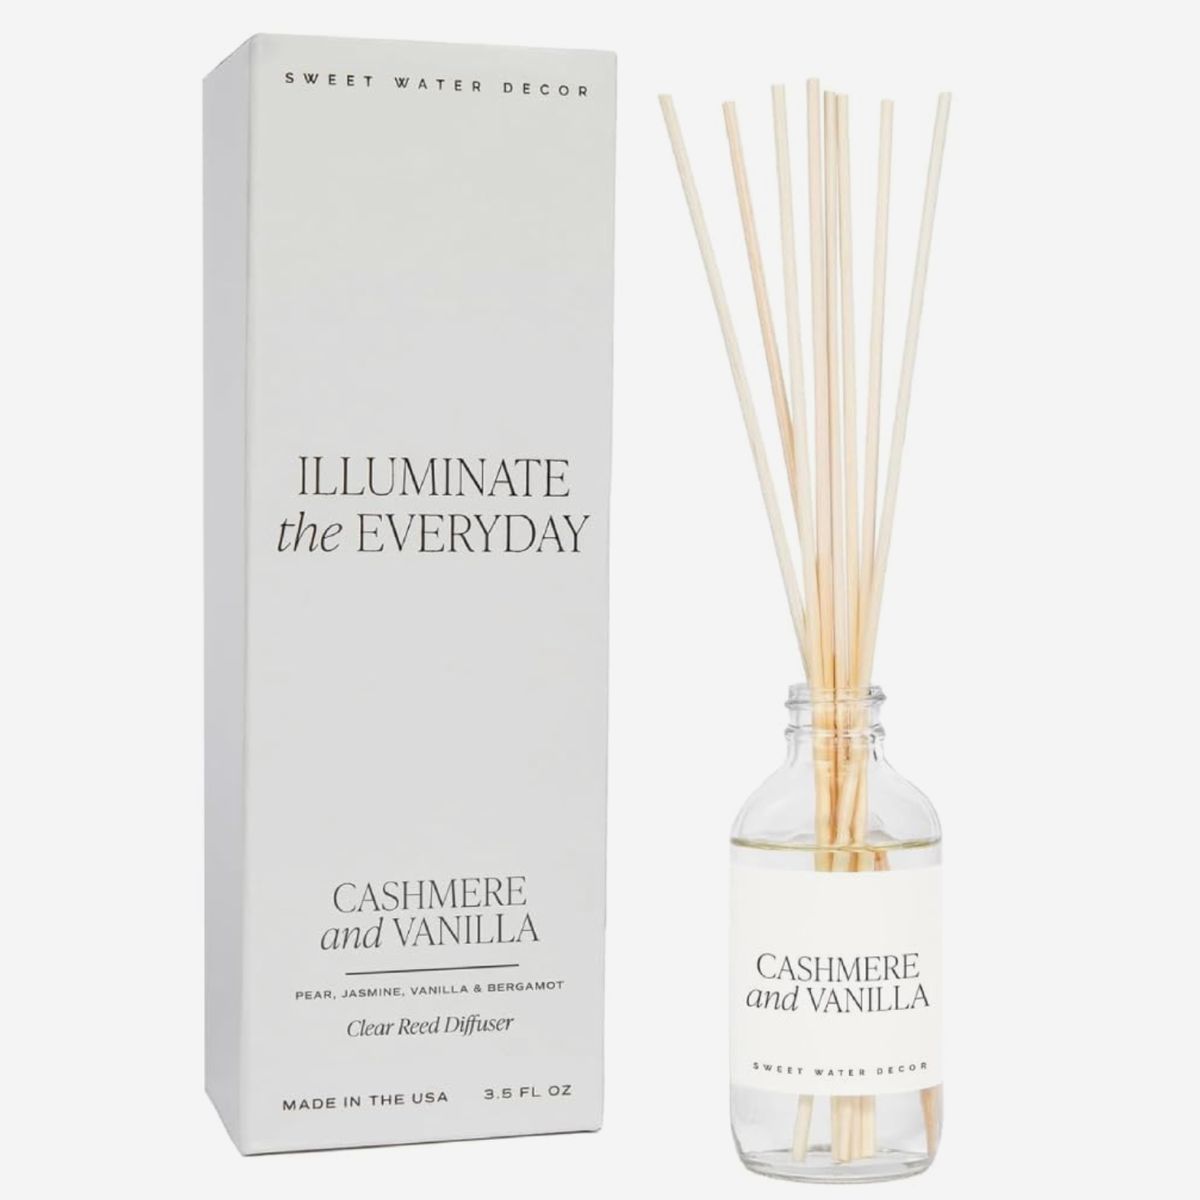 Sweet Water Cashmere and Vanilla Decor Amber Reed Diffuser Set